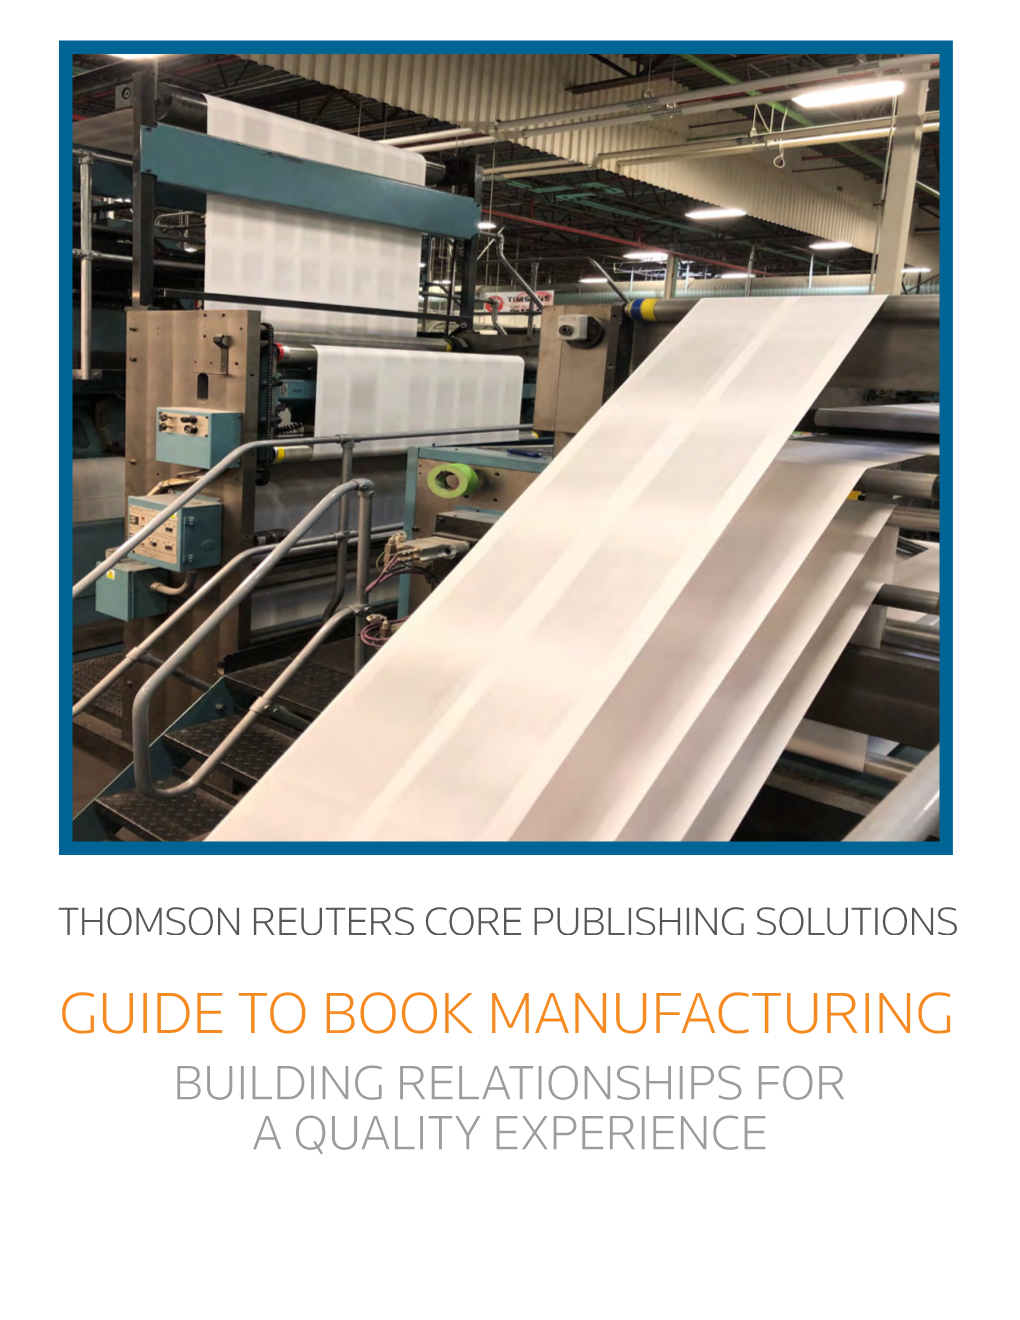 Guide to Book Manufacturing Building Relationships for a Quality Experience